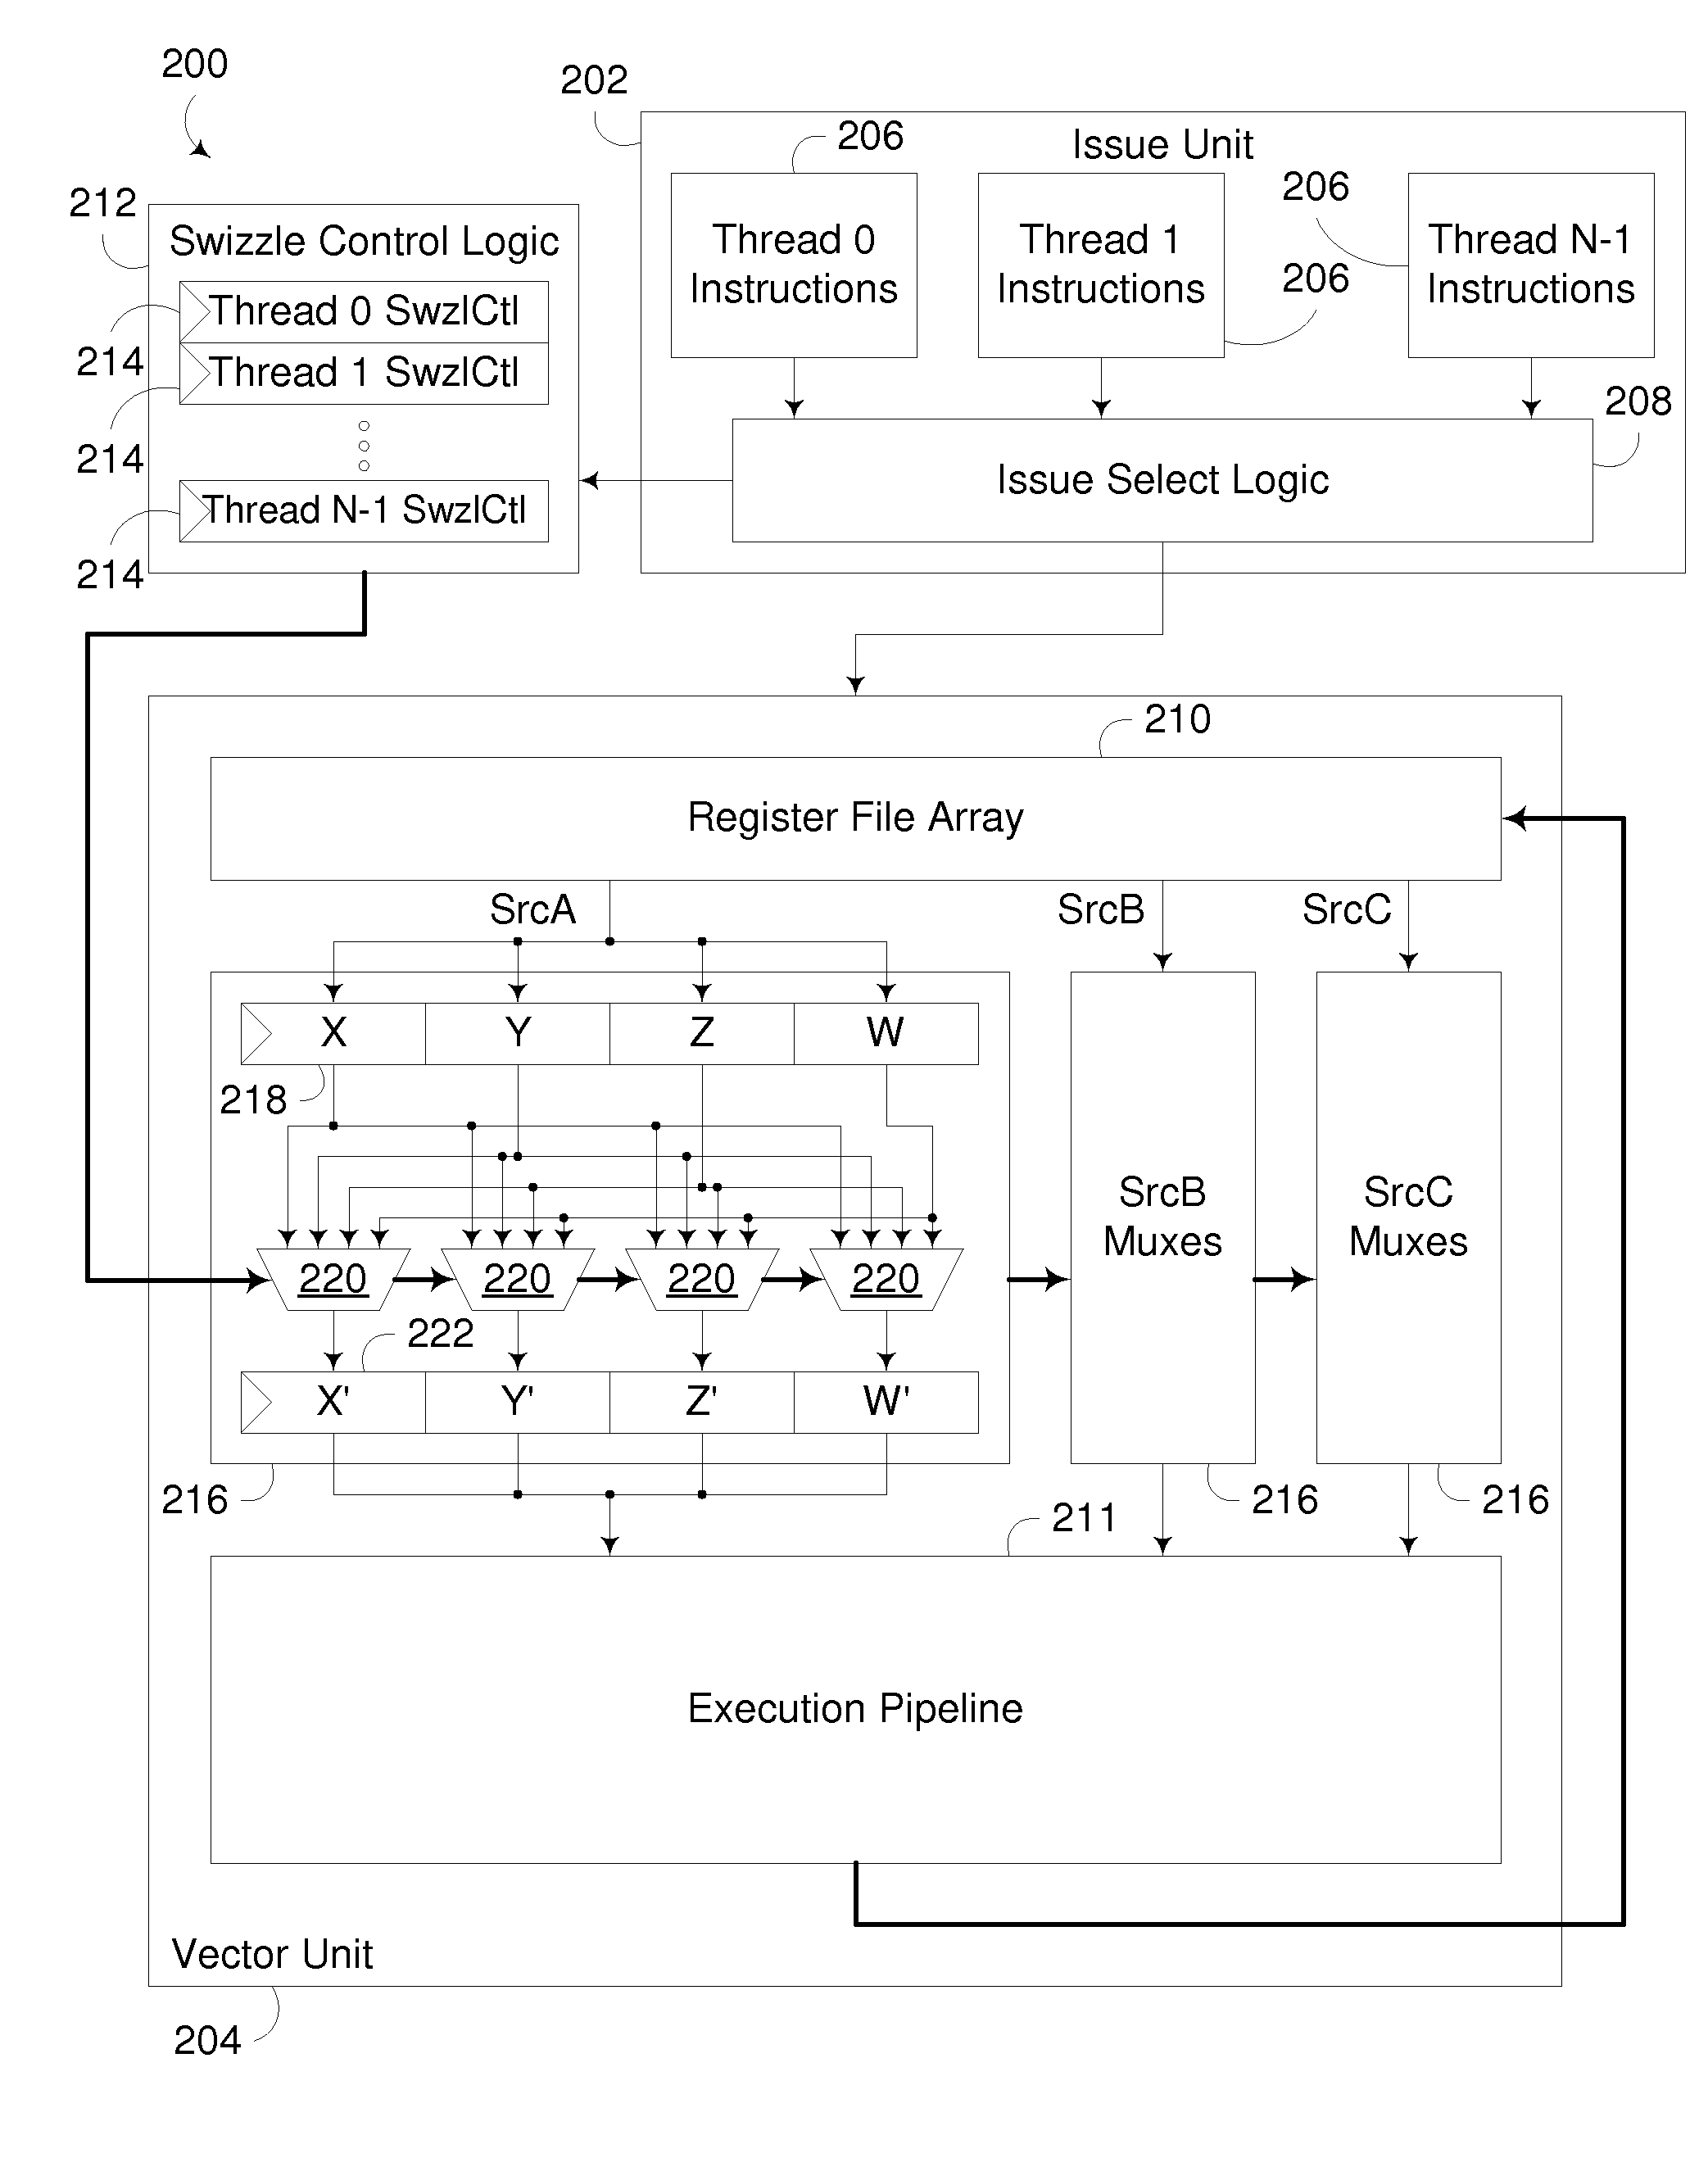 Processing Unit Incorporating Special Purpose Register for Use with Instruction-Based Persistent Vector Multiplexer Control